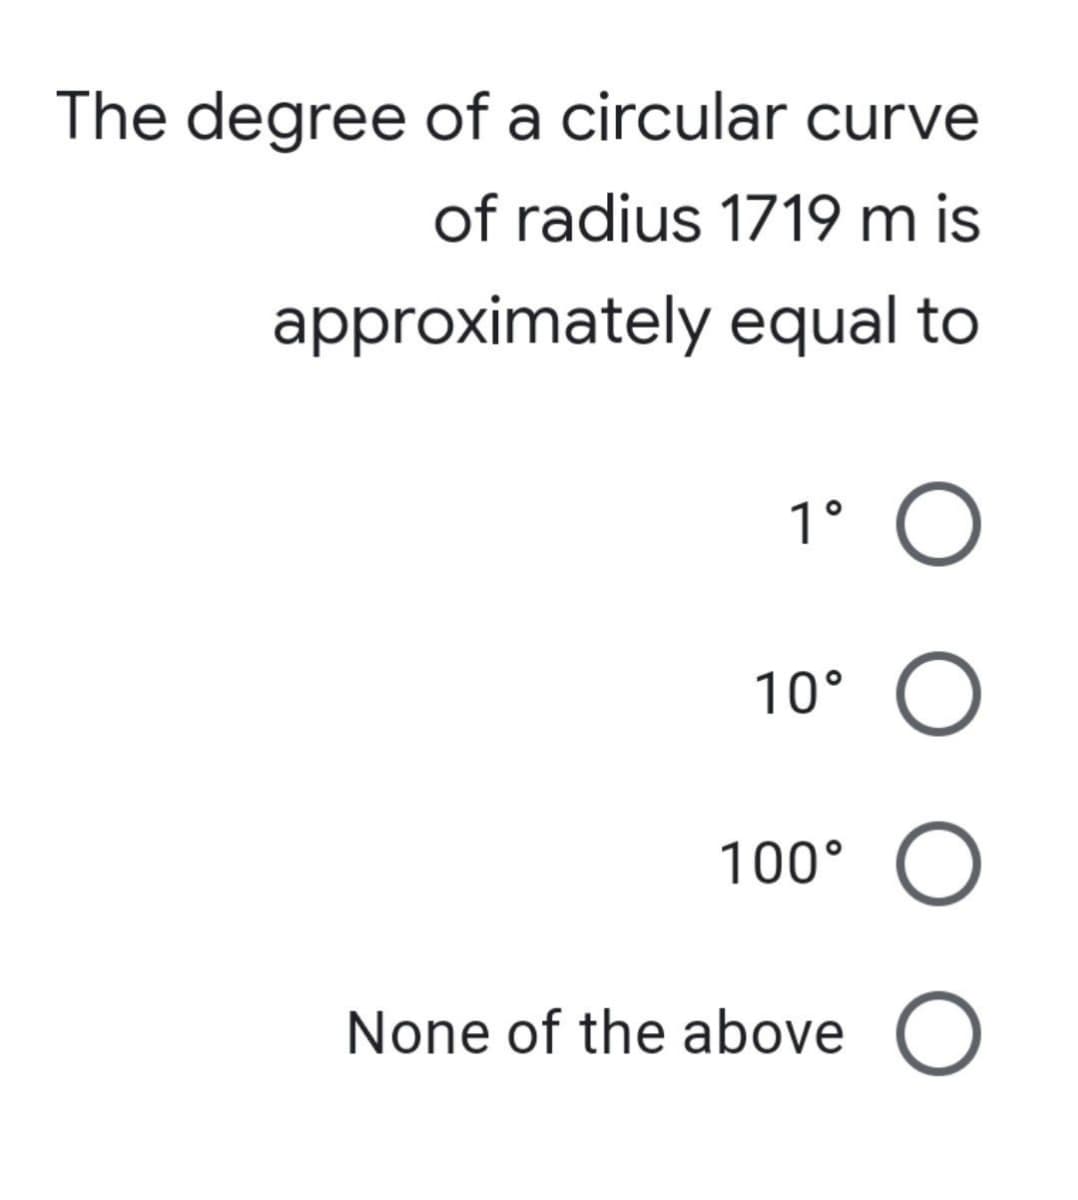 The degree of a circular curve
of radius 1719 m is
approximately equal to
1°
10°
100° O
None of the above C
